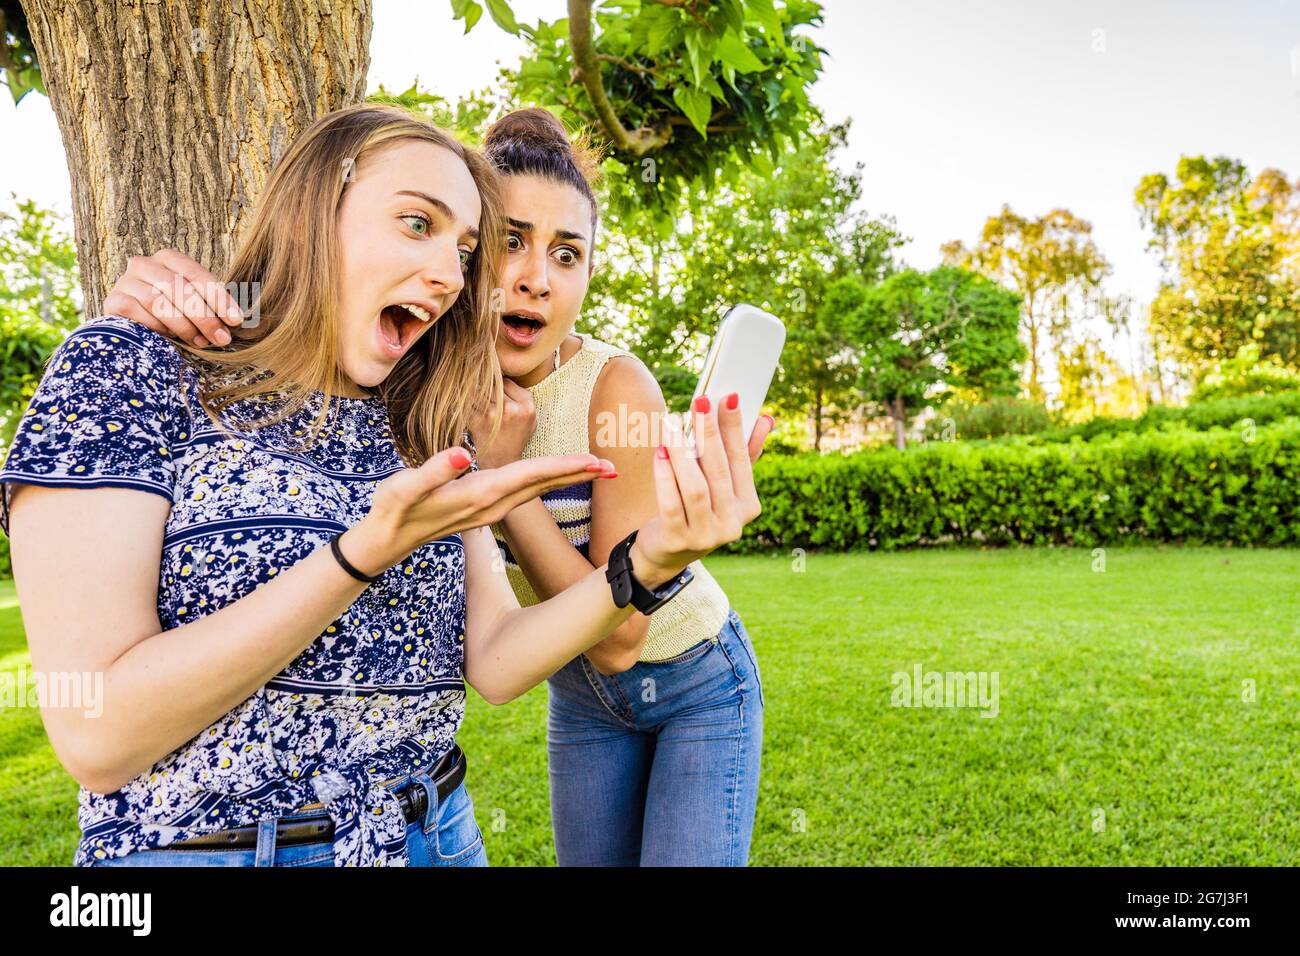 Two girls best friends look amazed at smartphone with disbelief grimaces and wide-open mouths and eyes in surprise Young women couple having fun with Stock Photo